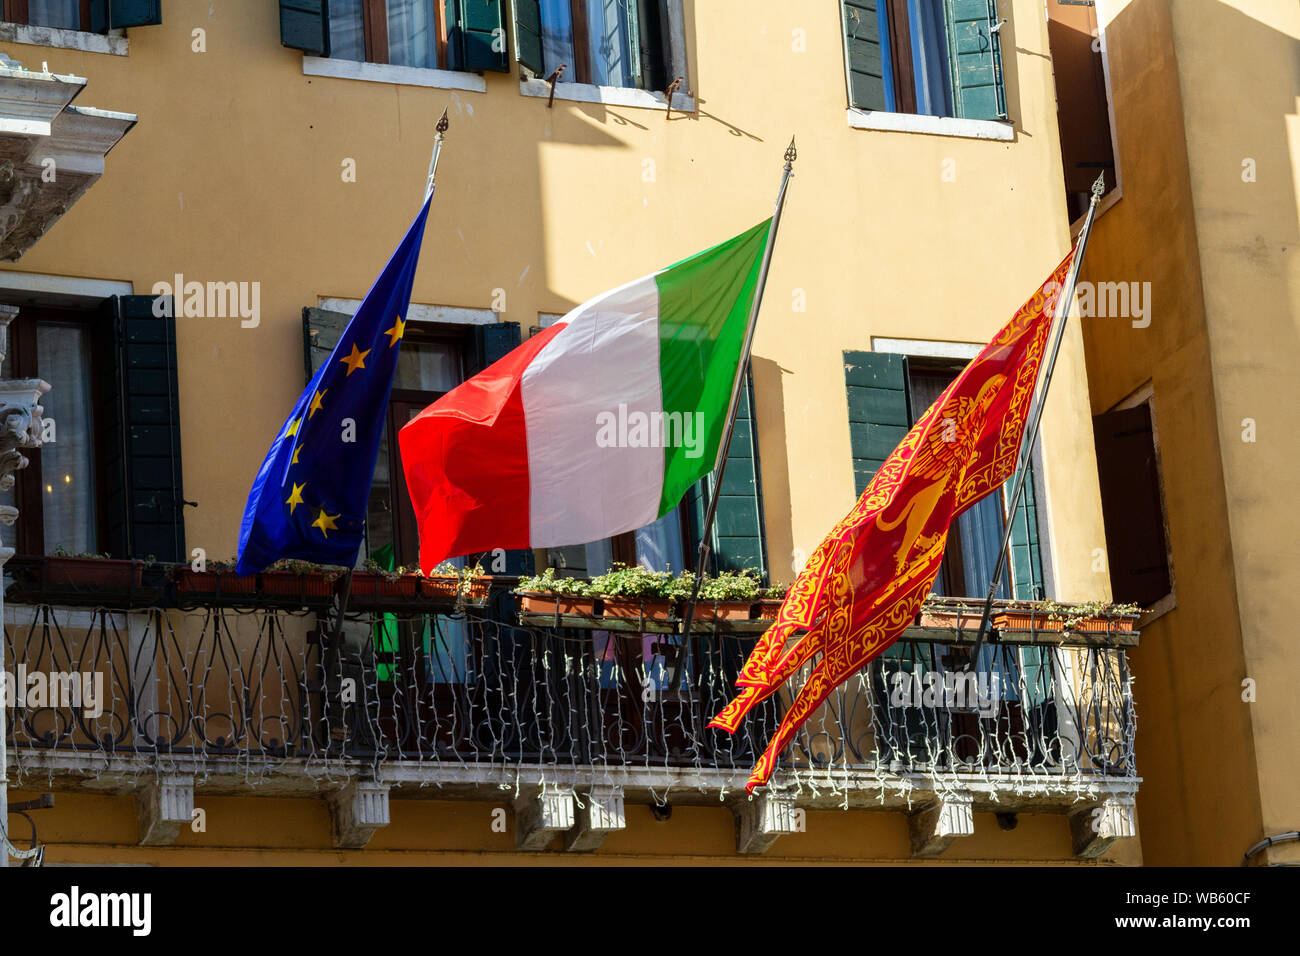 Italian, European Union's and Venice's flags hung together. Stock Photo